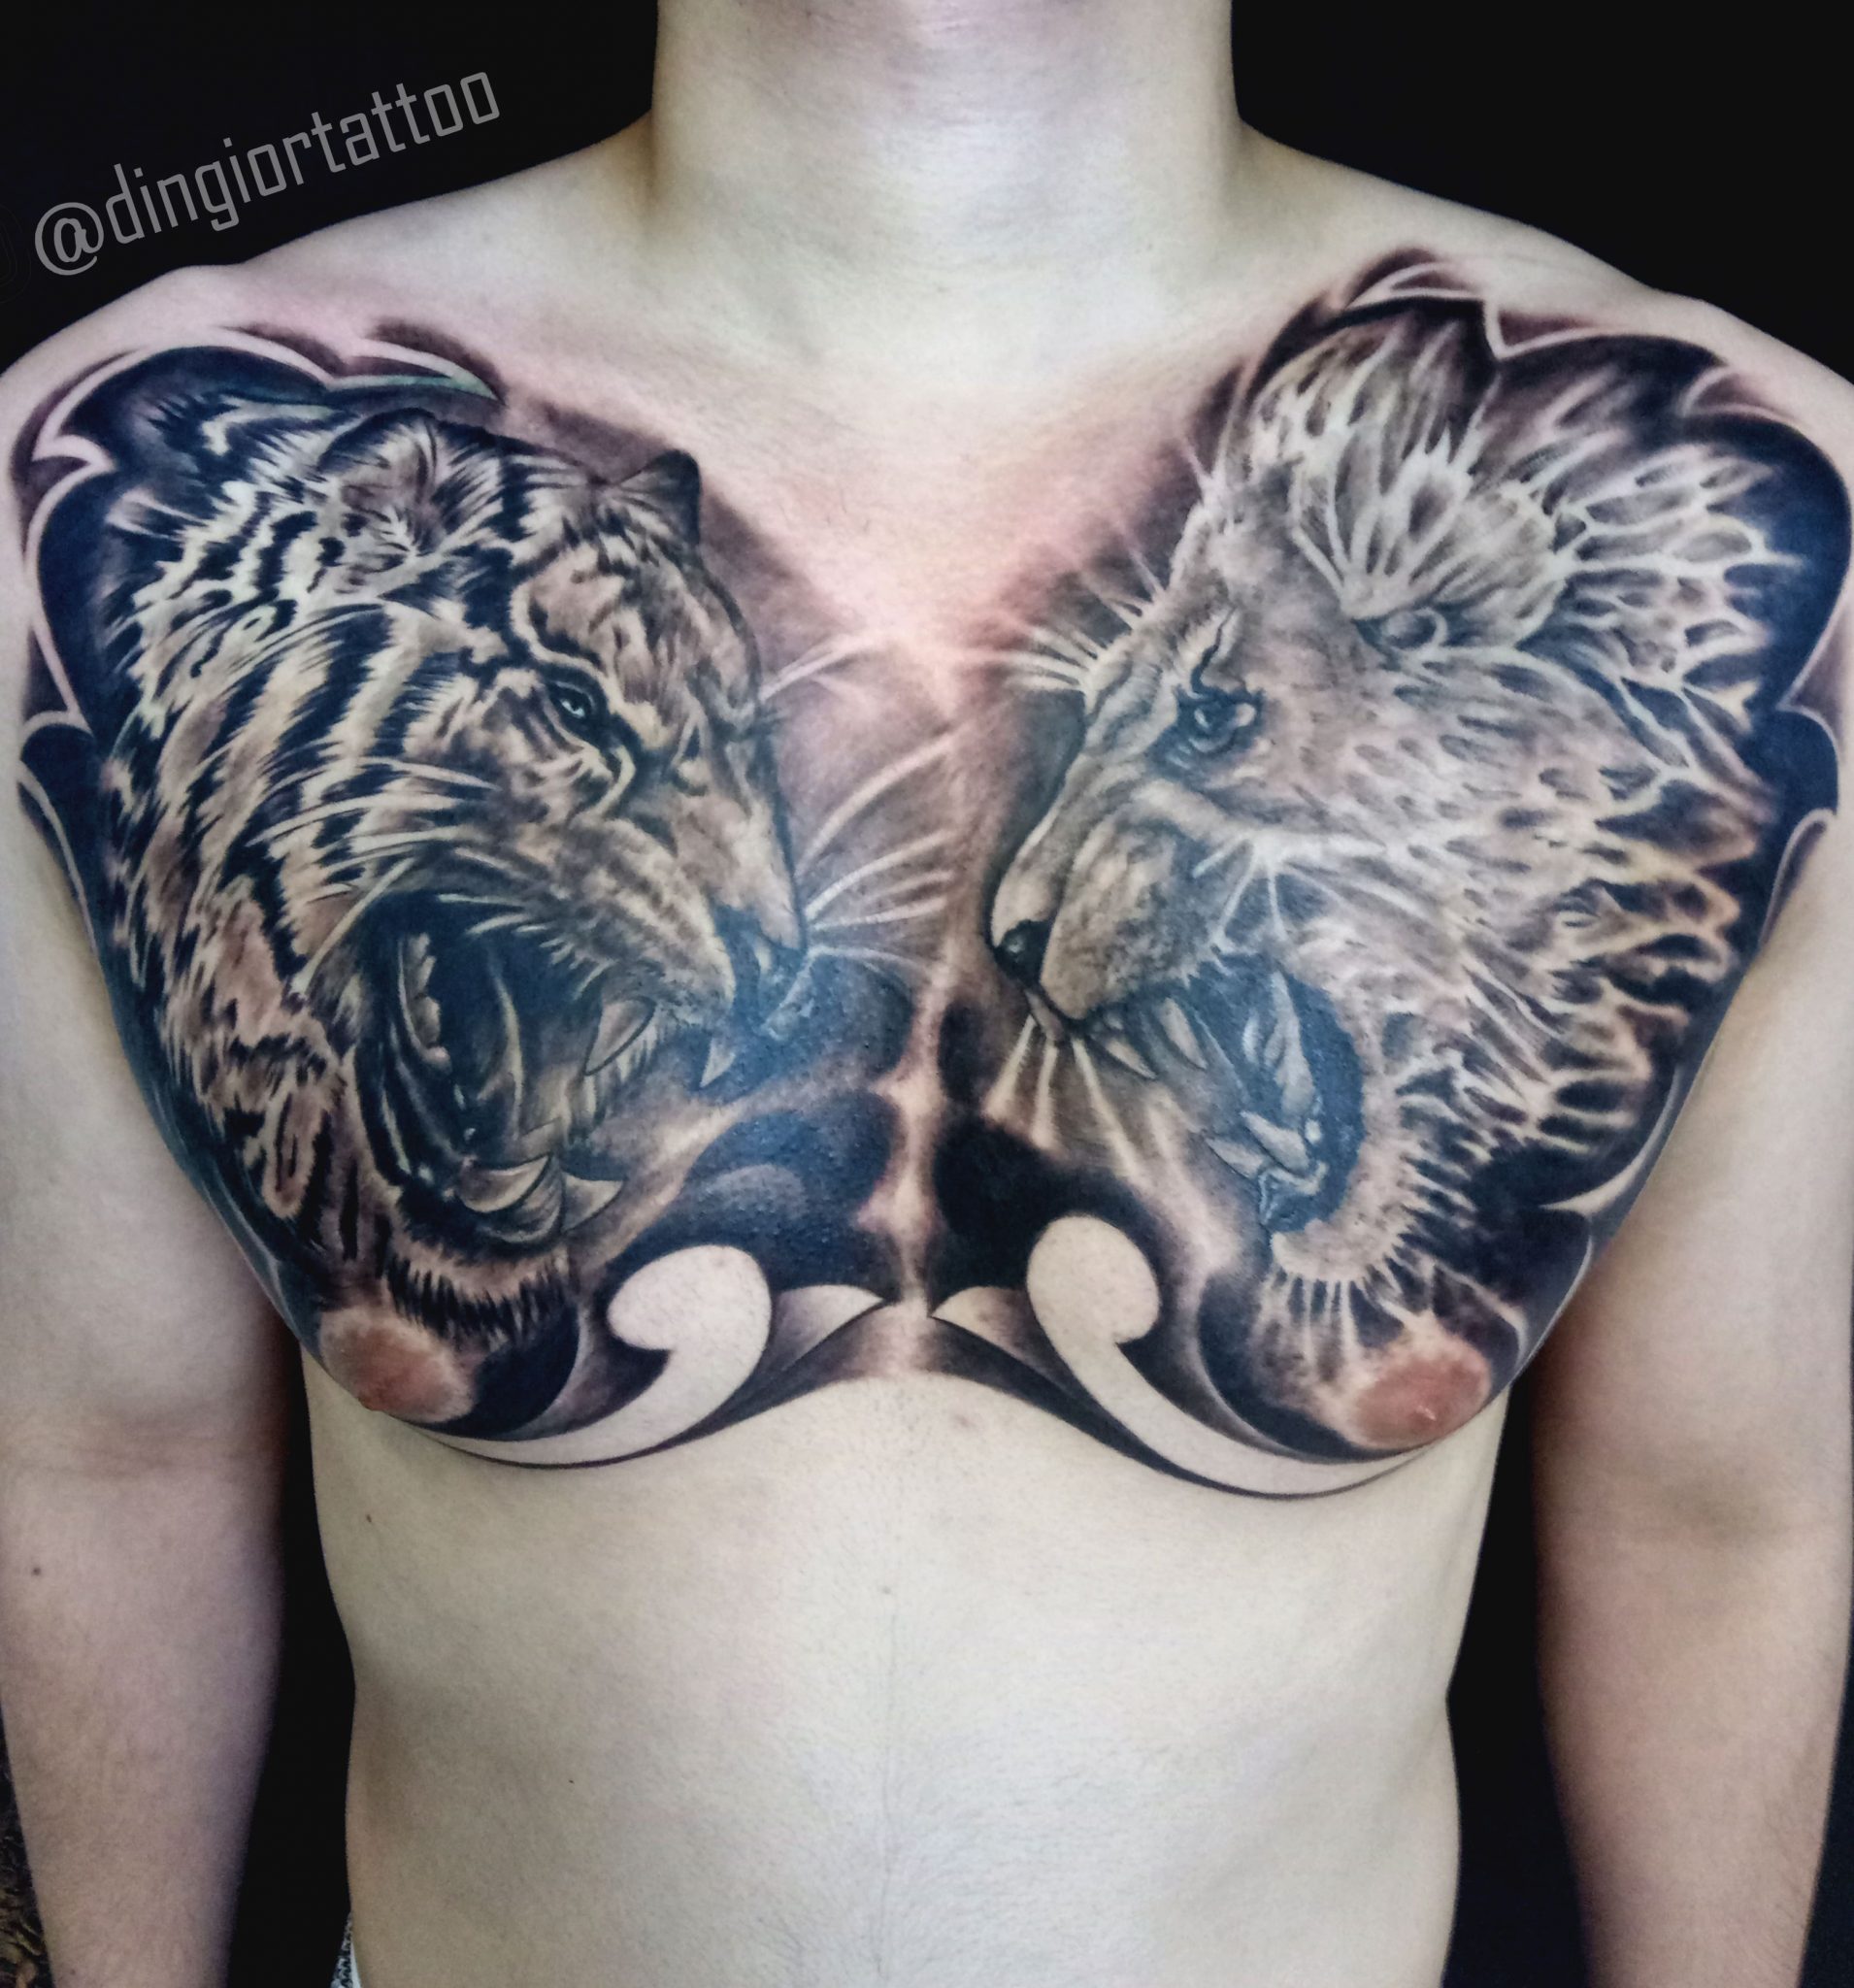 Realism or Realistic Lion and Tiger Tattoo